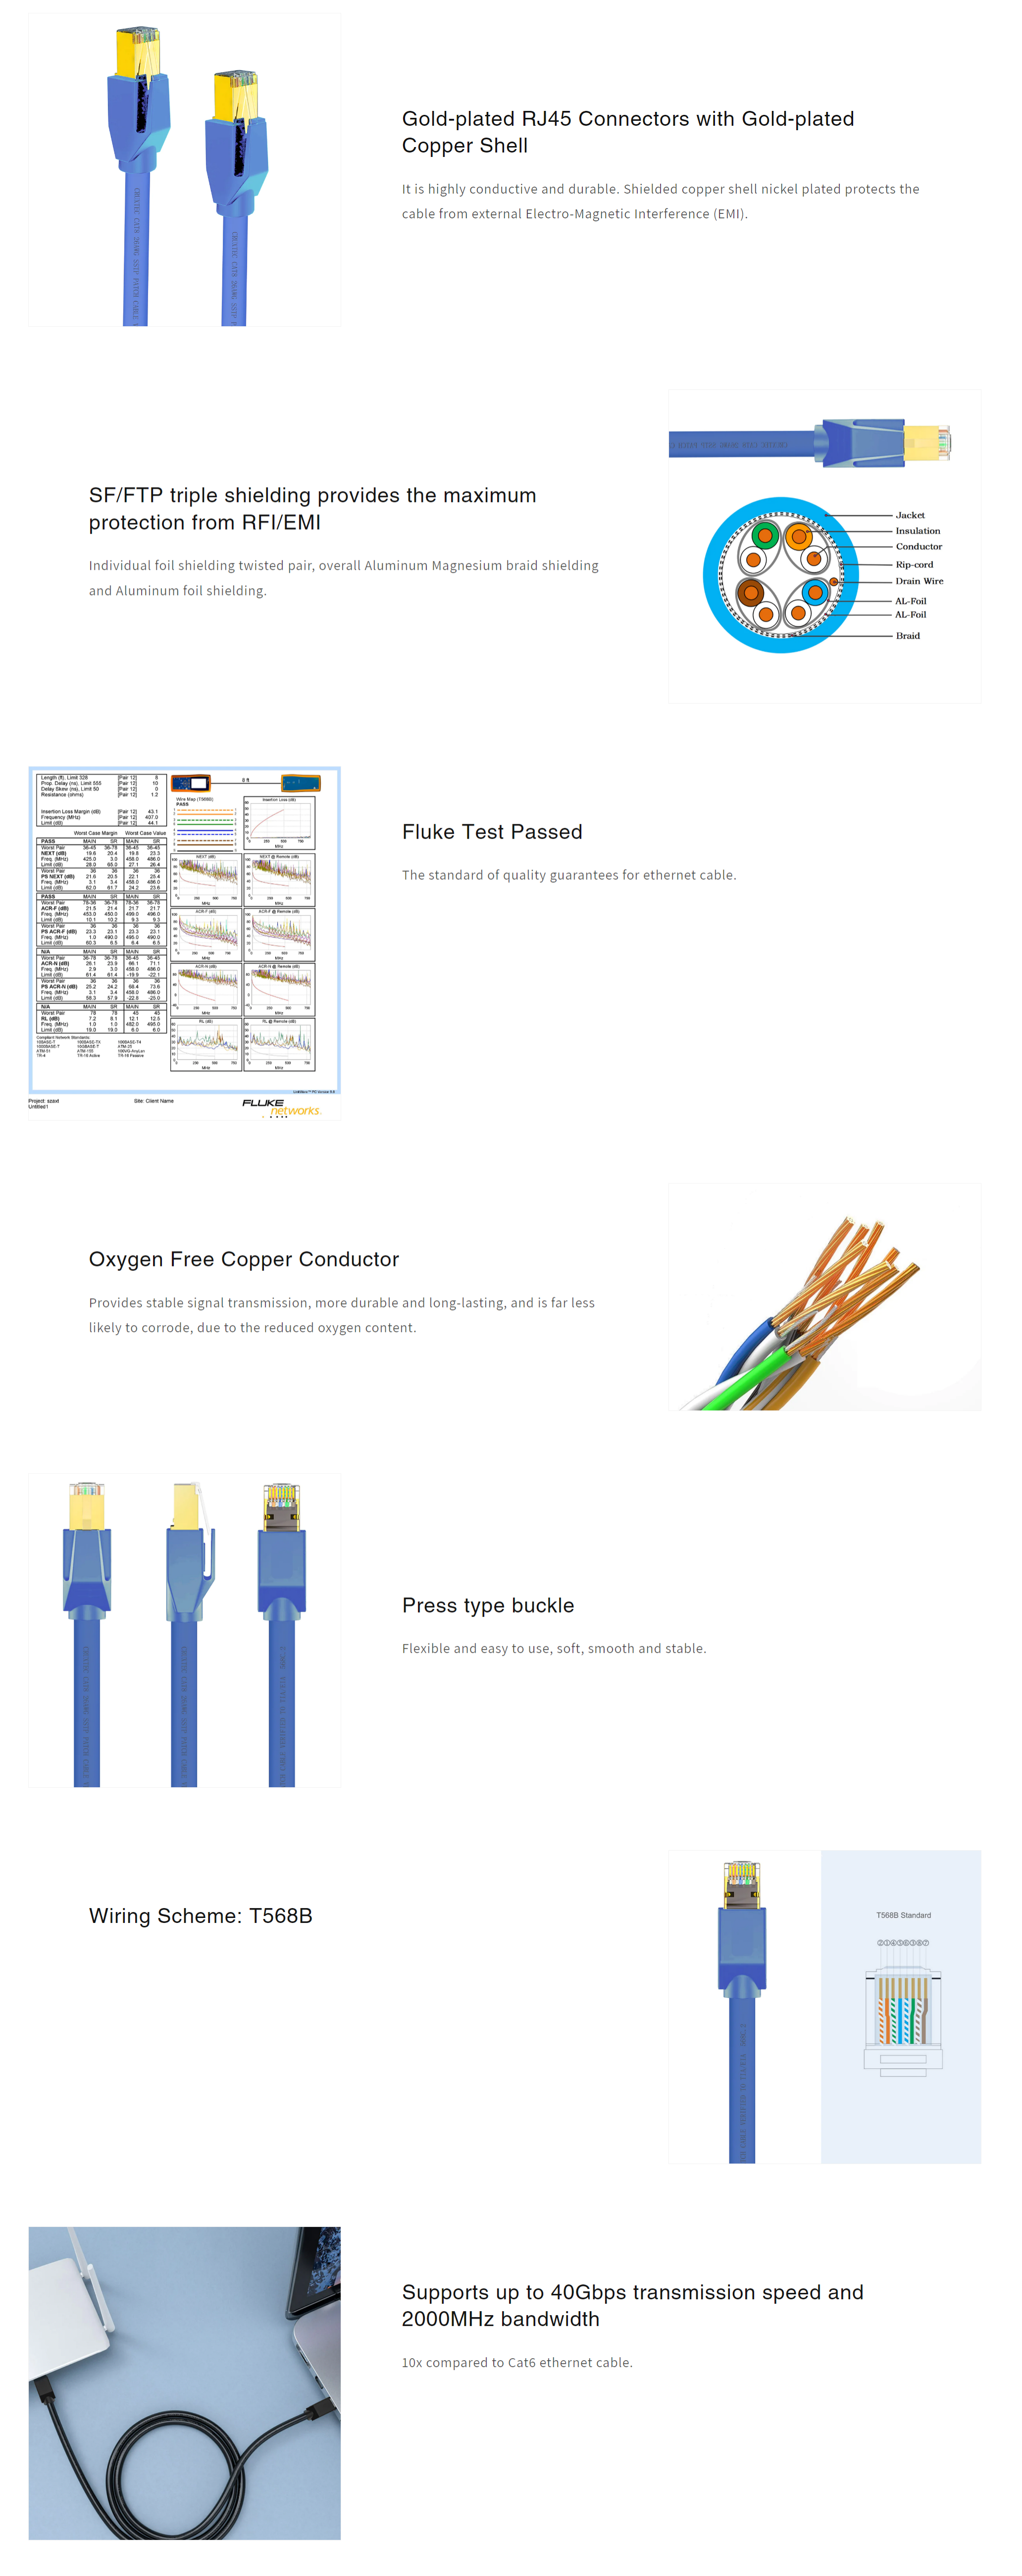 A large marketing image providing additional information about the product Cruxtec CAT8 10m 40GbE SF/FTP Triple Shielding Ethernet Cable Blue - Additional alt info not provided